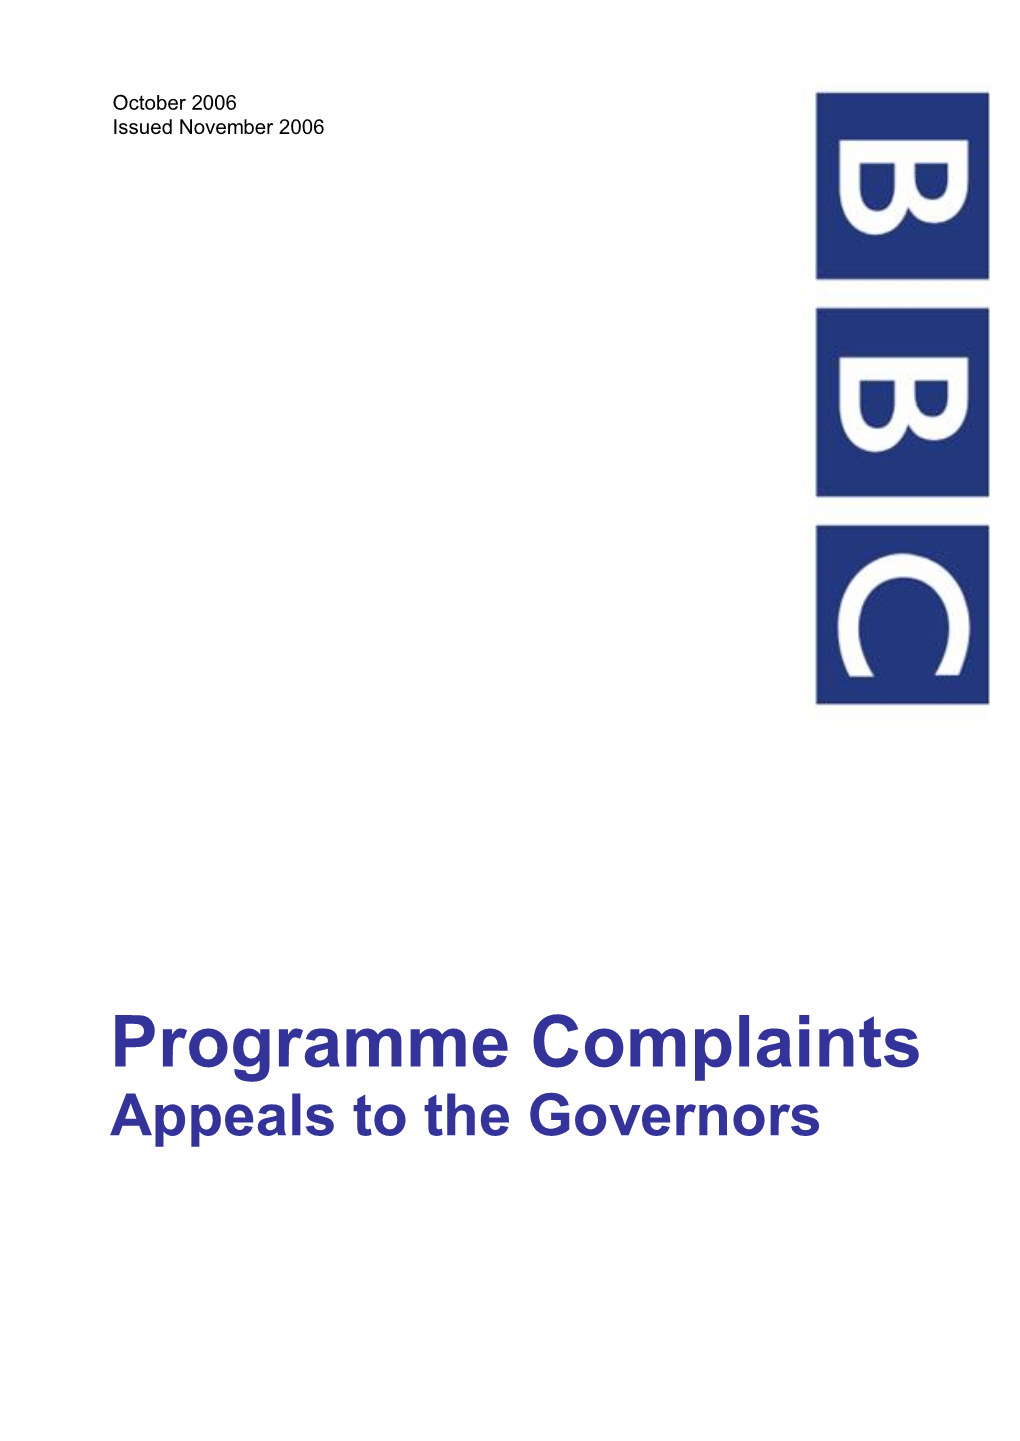 Programme Complaints Appeals to the Governors